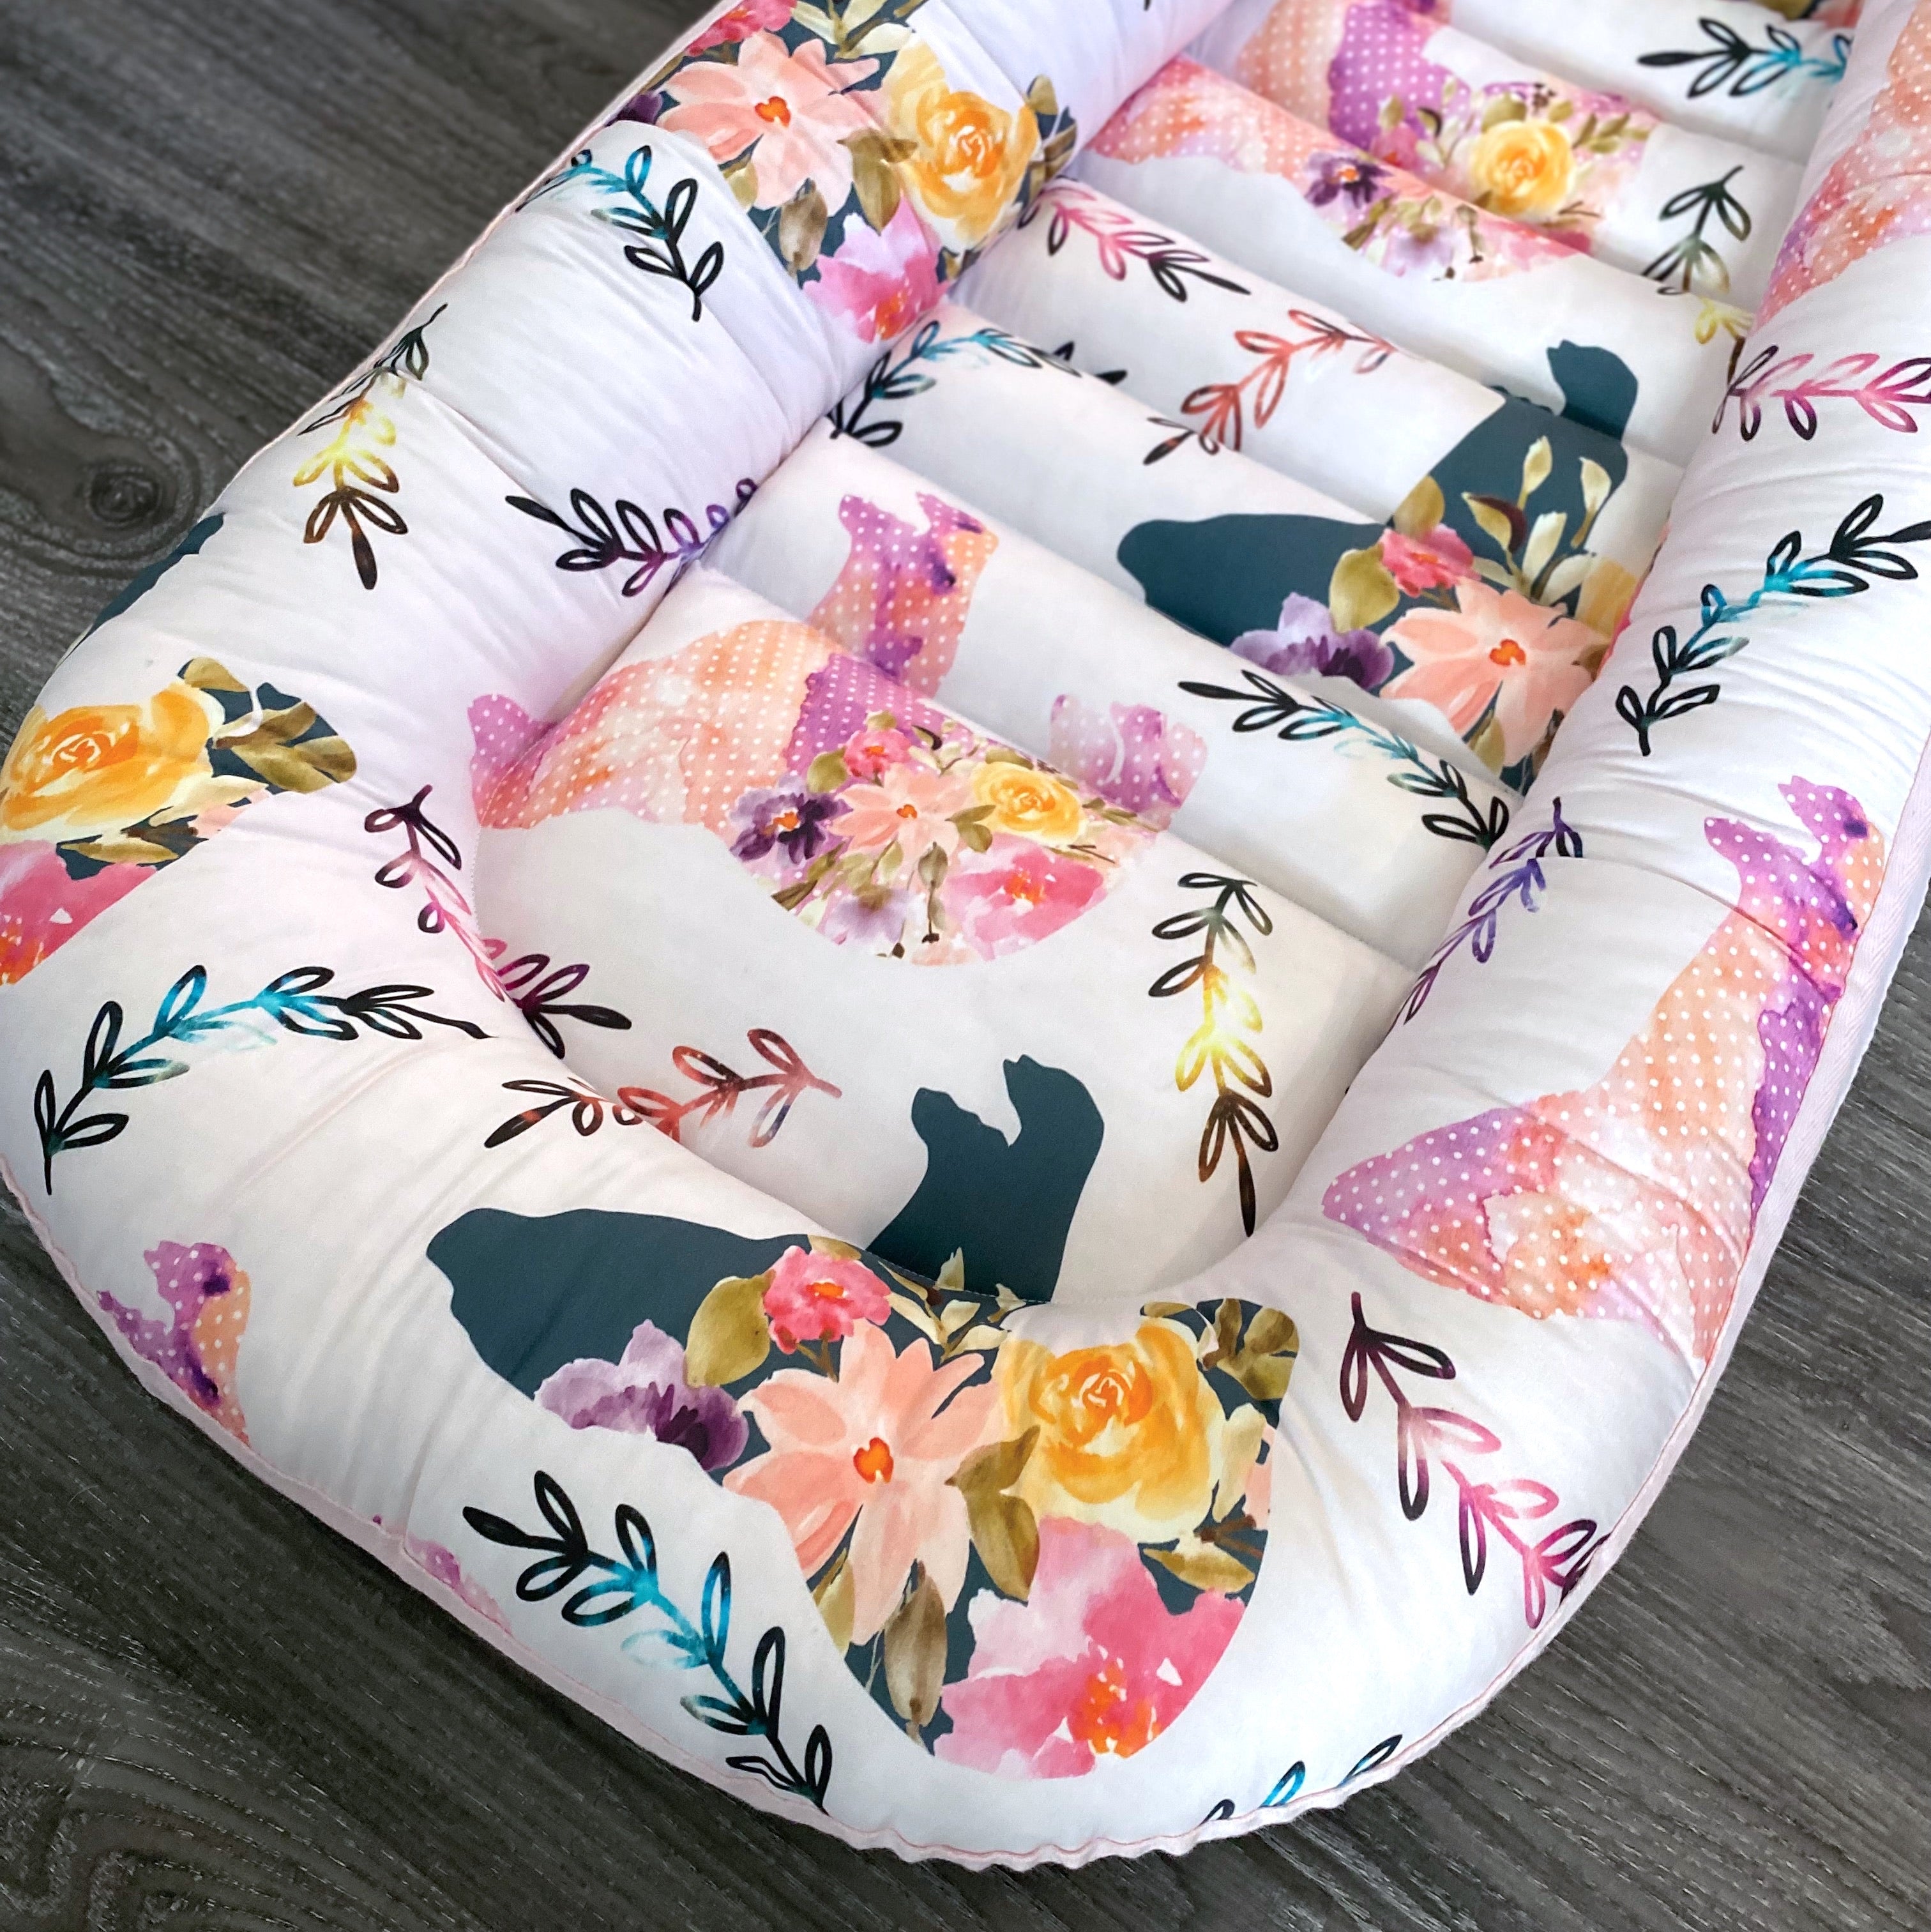 baby nest , baby lounging nest, co-sleeper, similar to dockatot and snuggle me products. This one is featured in a floral bear and pink design.